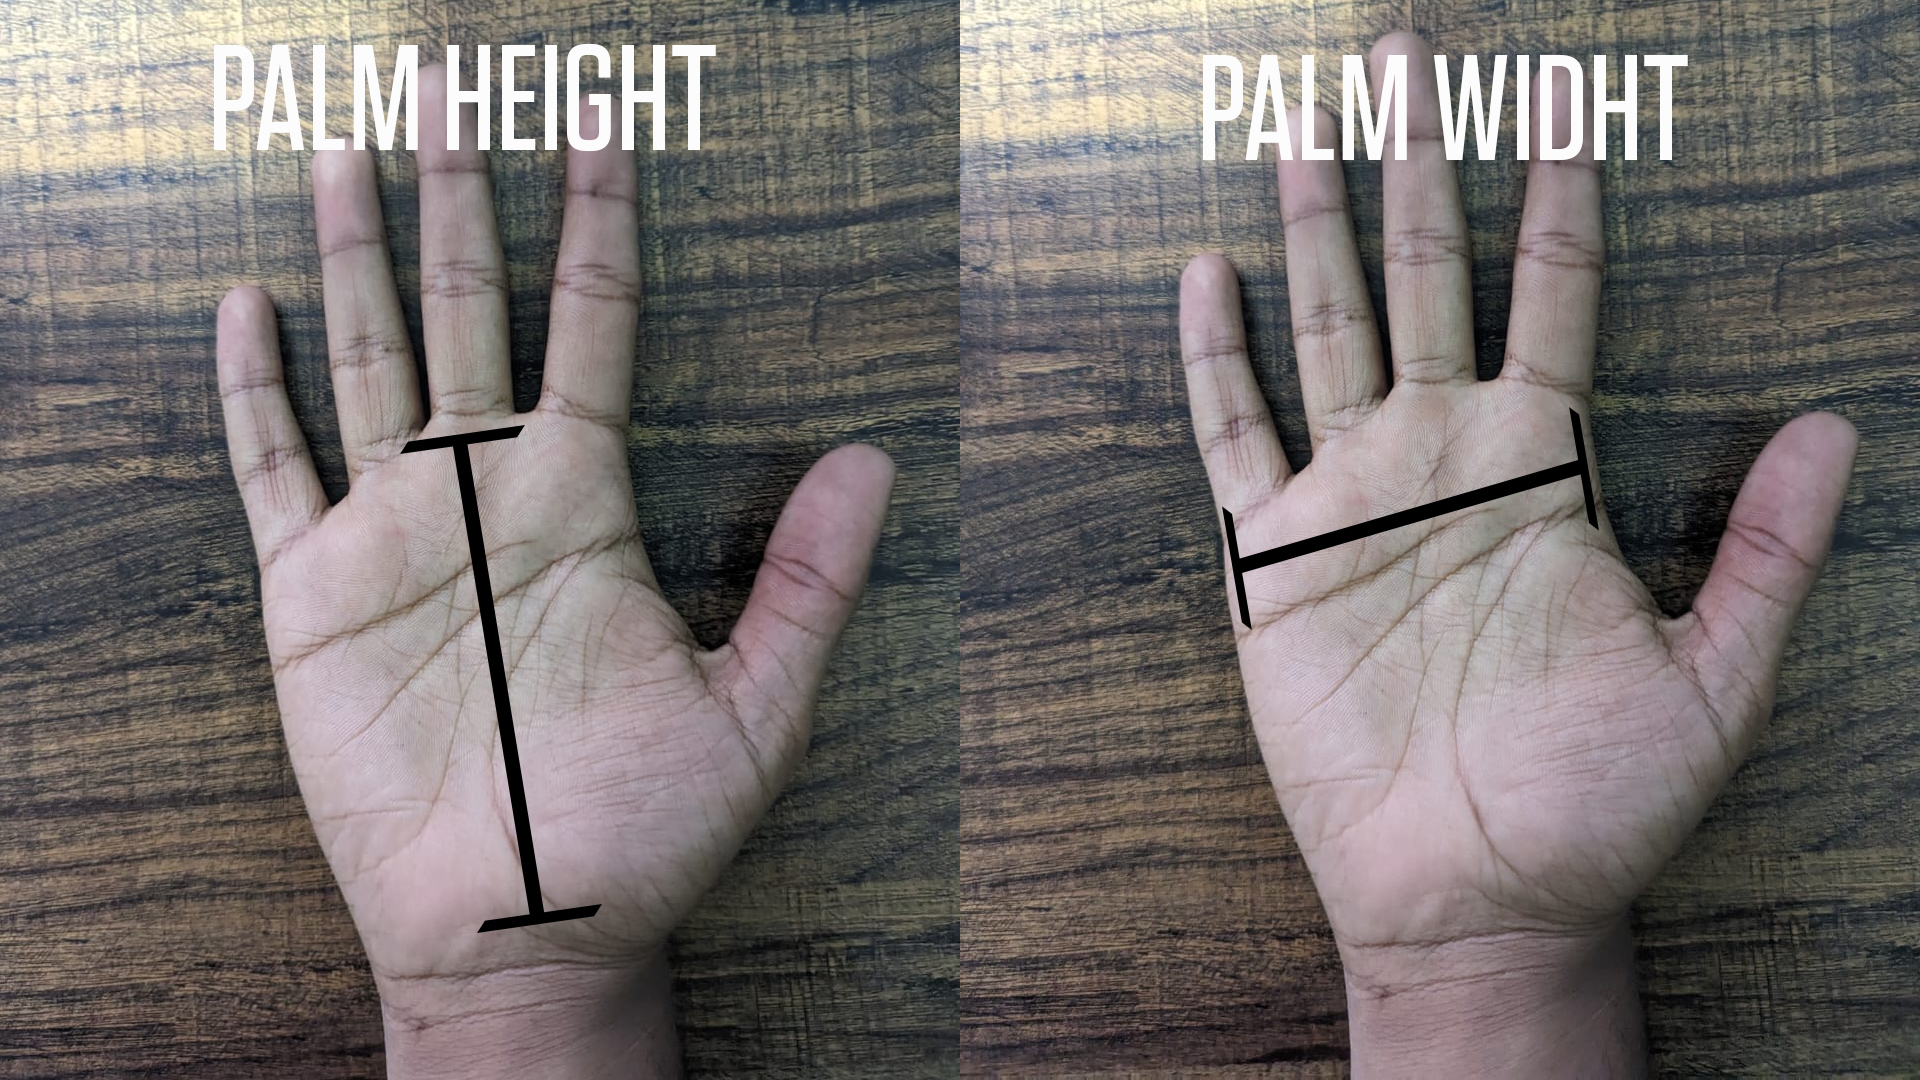 An image showing palm width and palm height